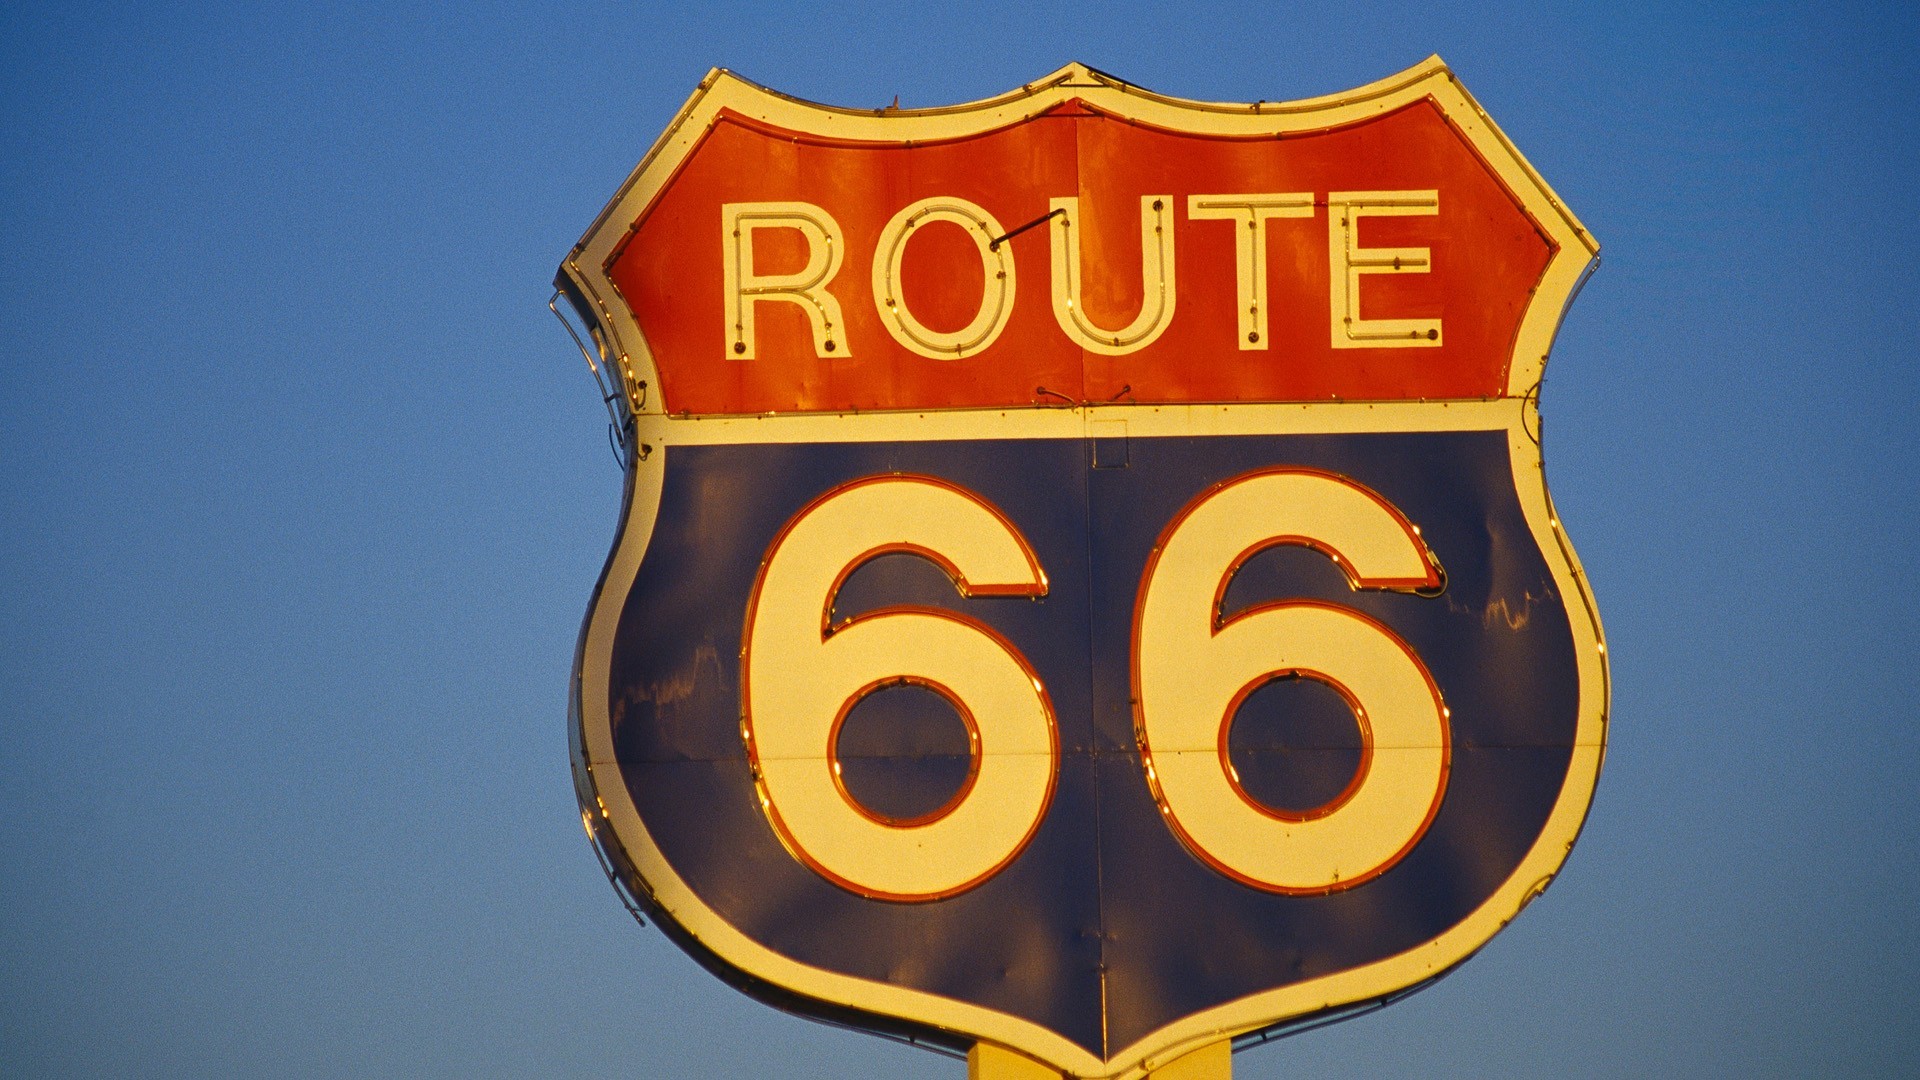 General 1920x1080 Route 66 signs simple background numbers blue background USA outdoors